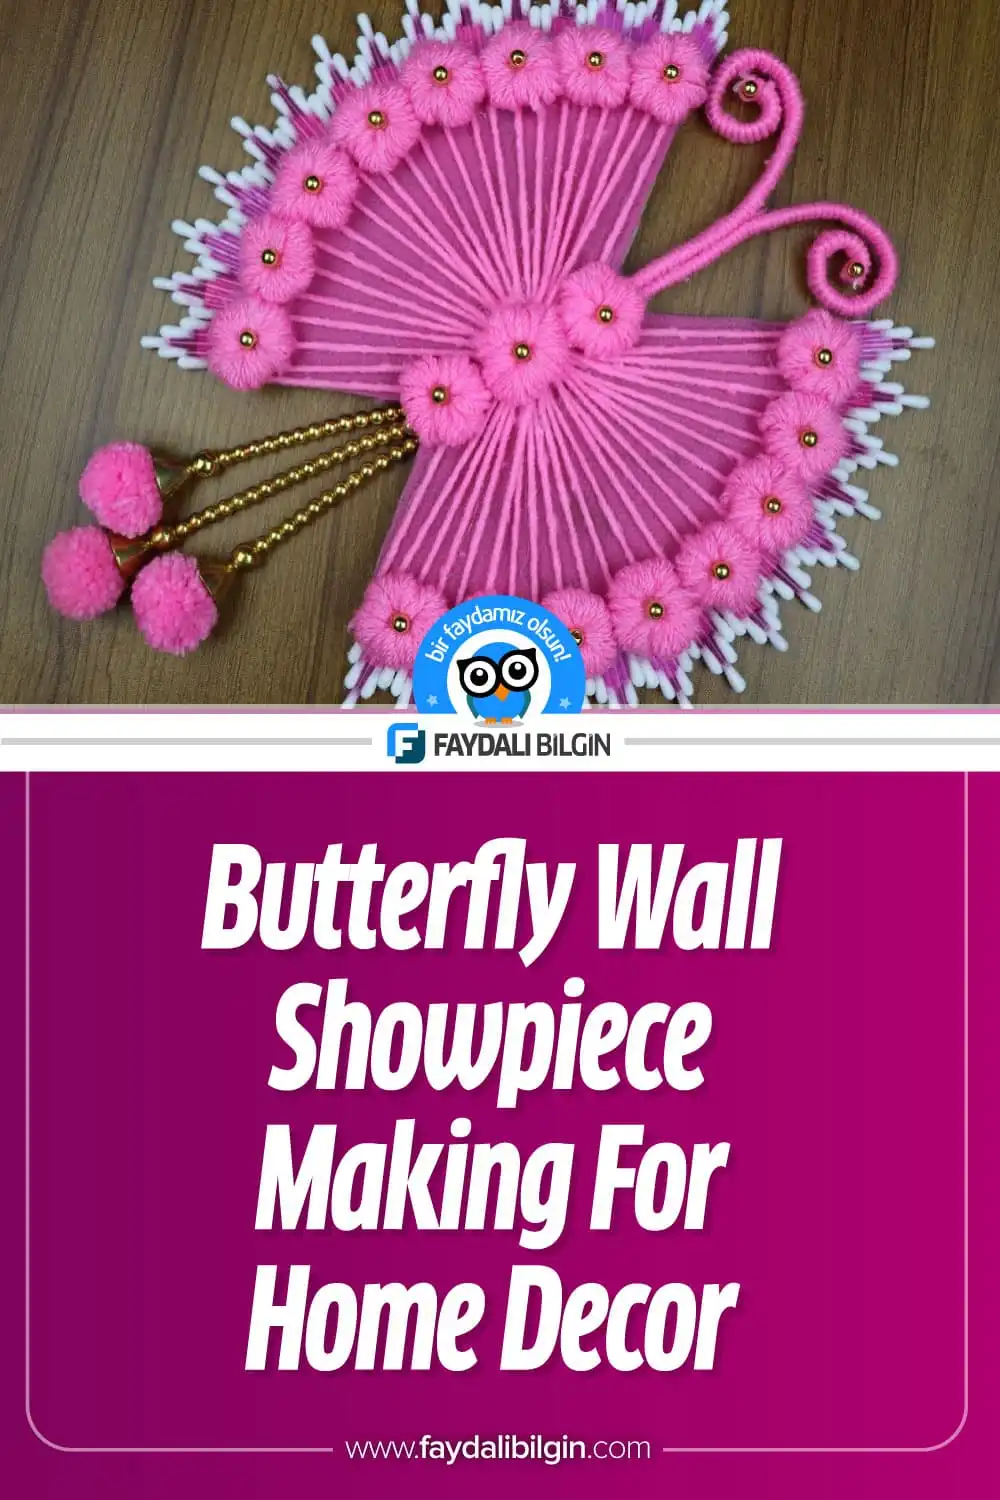 Butterfly Wall Showpiece Making For Home Decor